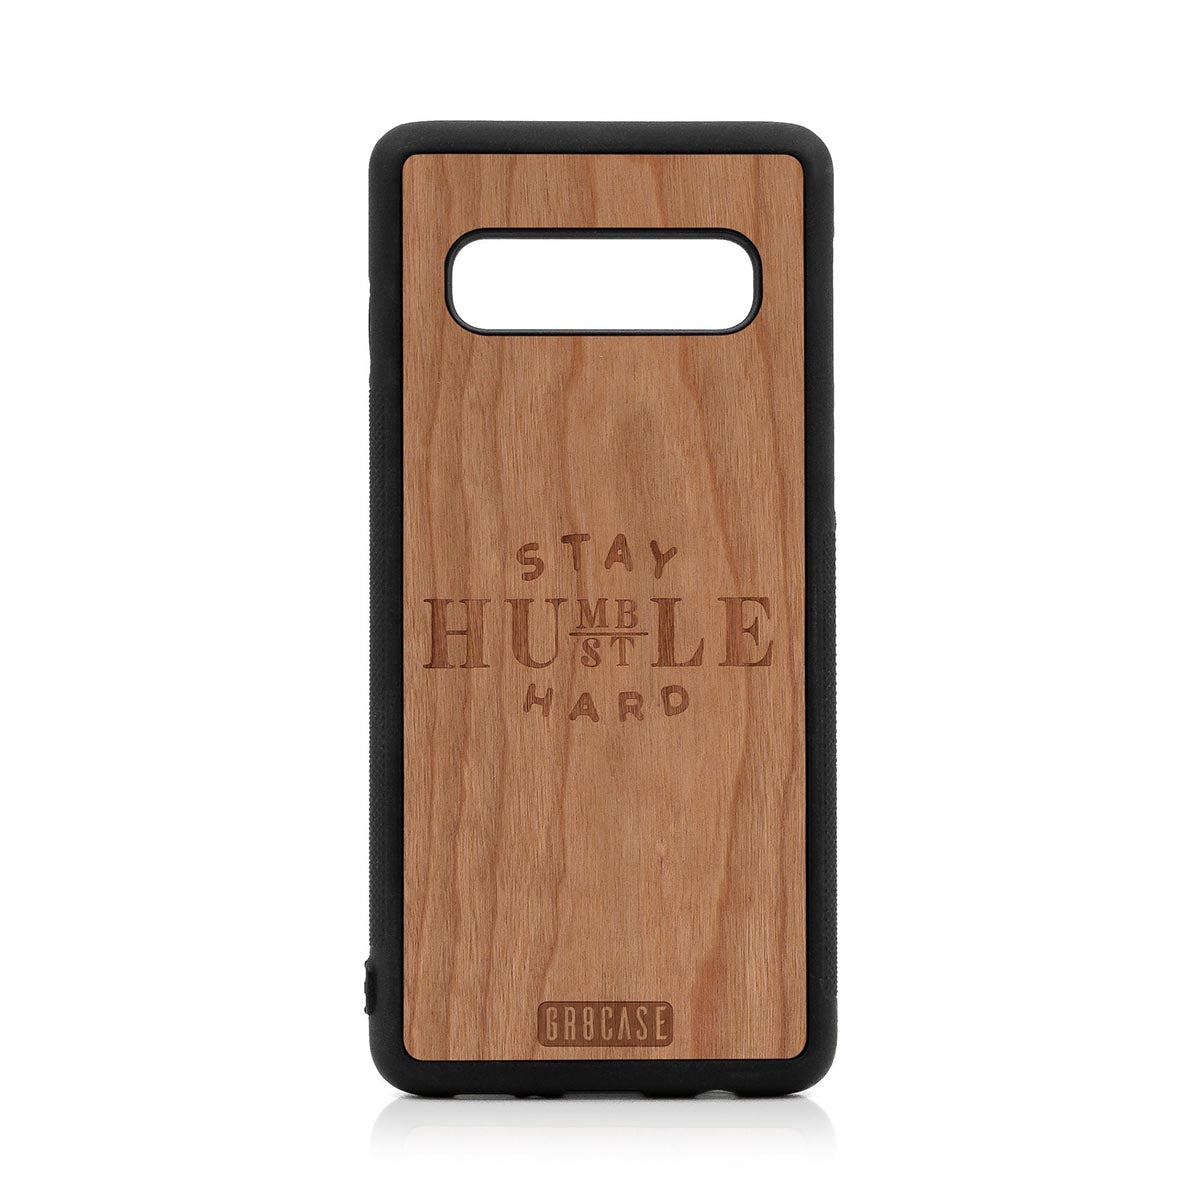 Stay Humble Hustle Hard Design Wood Case For Samsung Galaxy S10 by GR8CASE